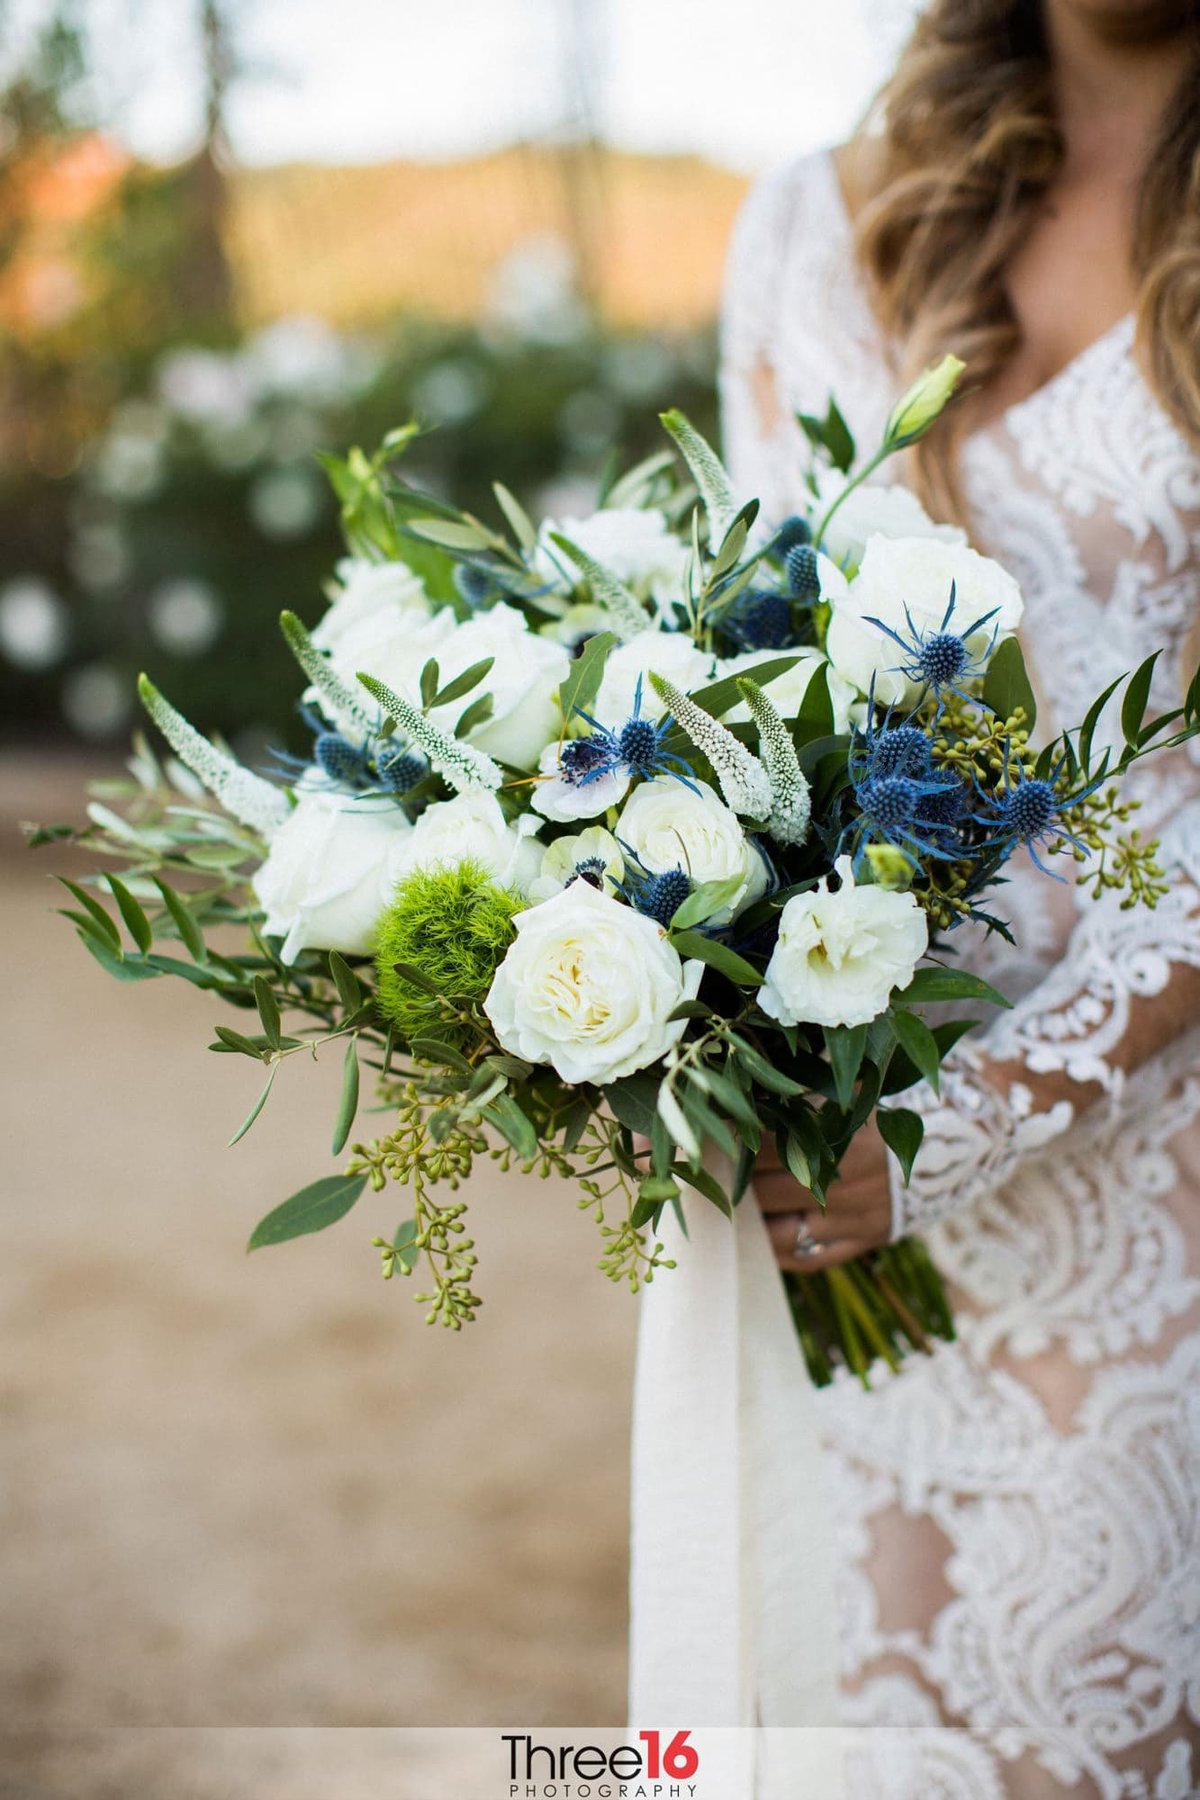 Beautiful bouquet for the Bride